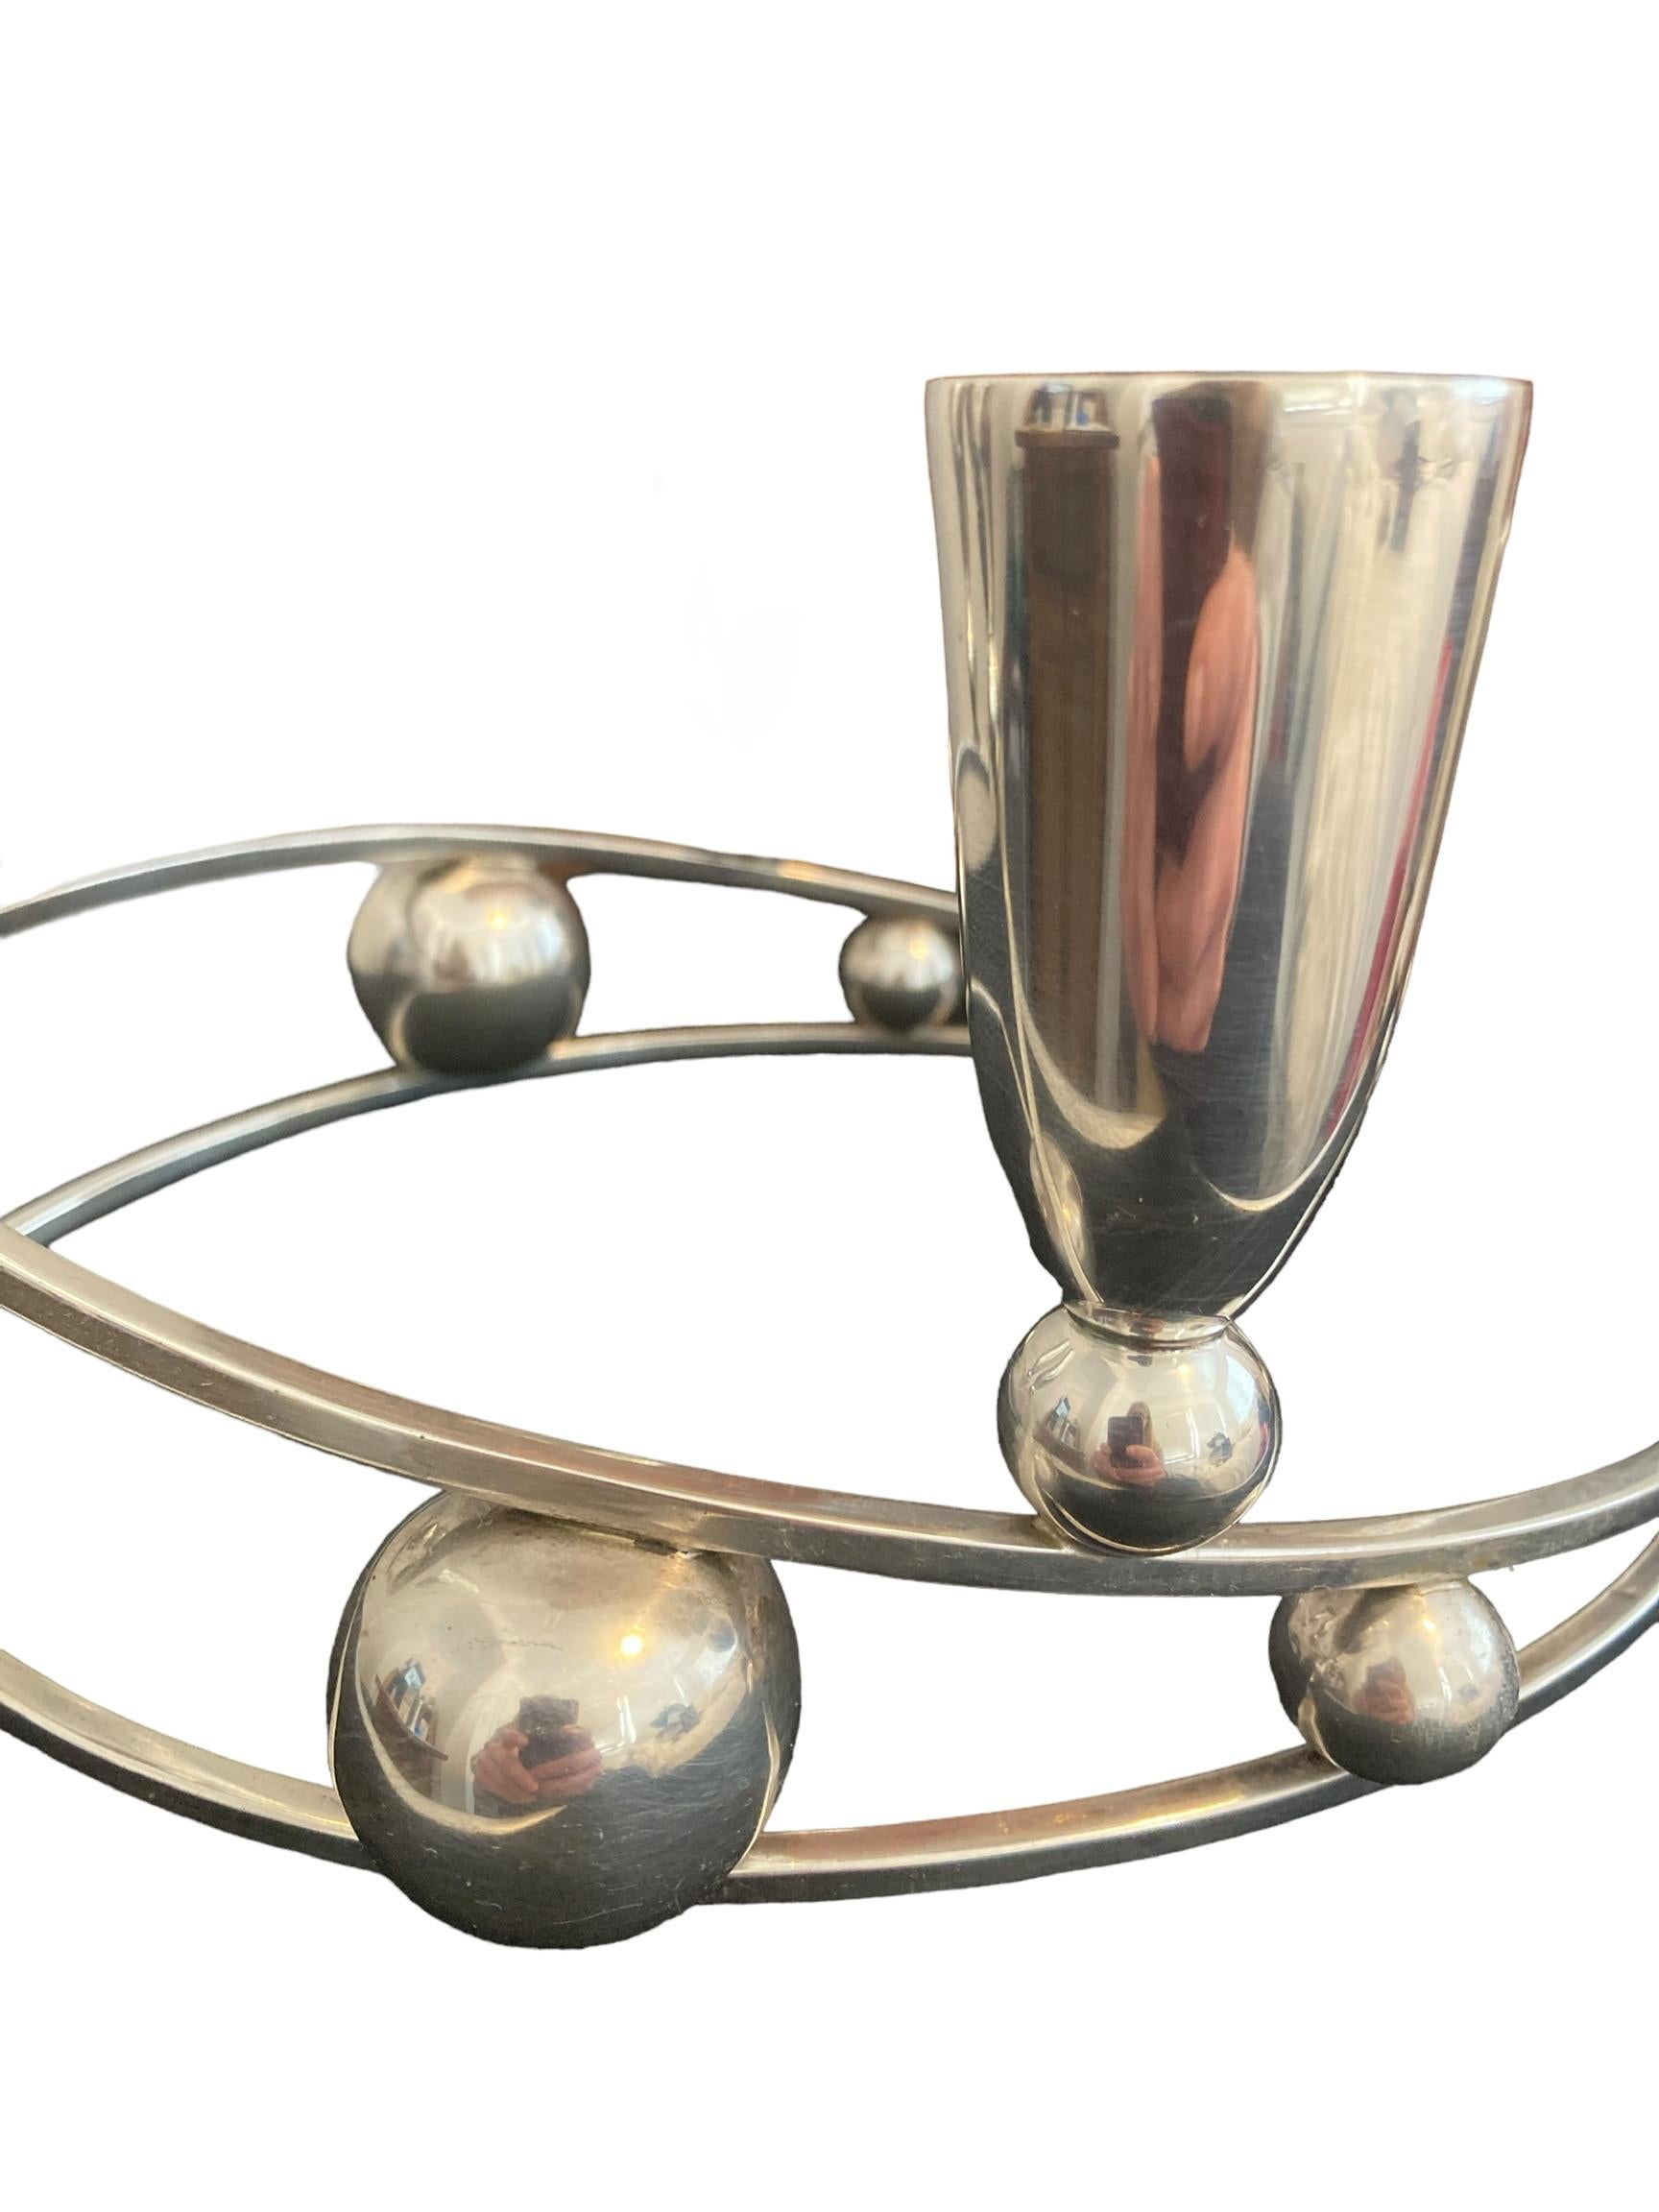 This highly desirable and sought after pair of Mid-Century Modernist P Lopez G sterling silver candelabra candlesticks was made in Mexico, circa 1950. Each piece design is of a stylized curvilinear sphere style, with three tulip-shaped candleholders